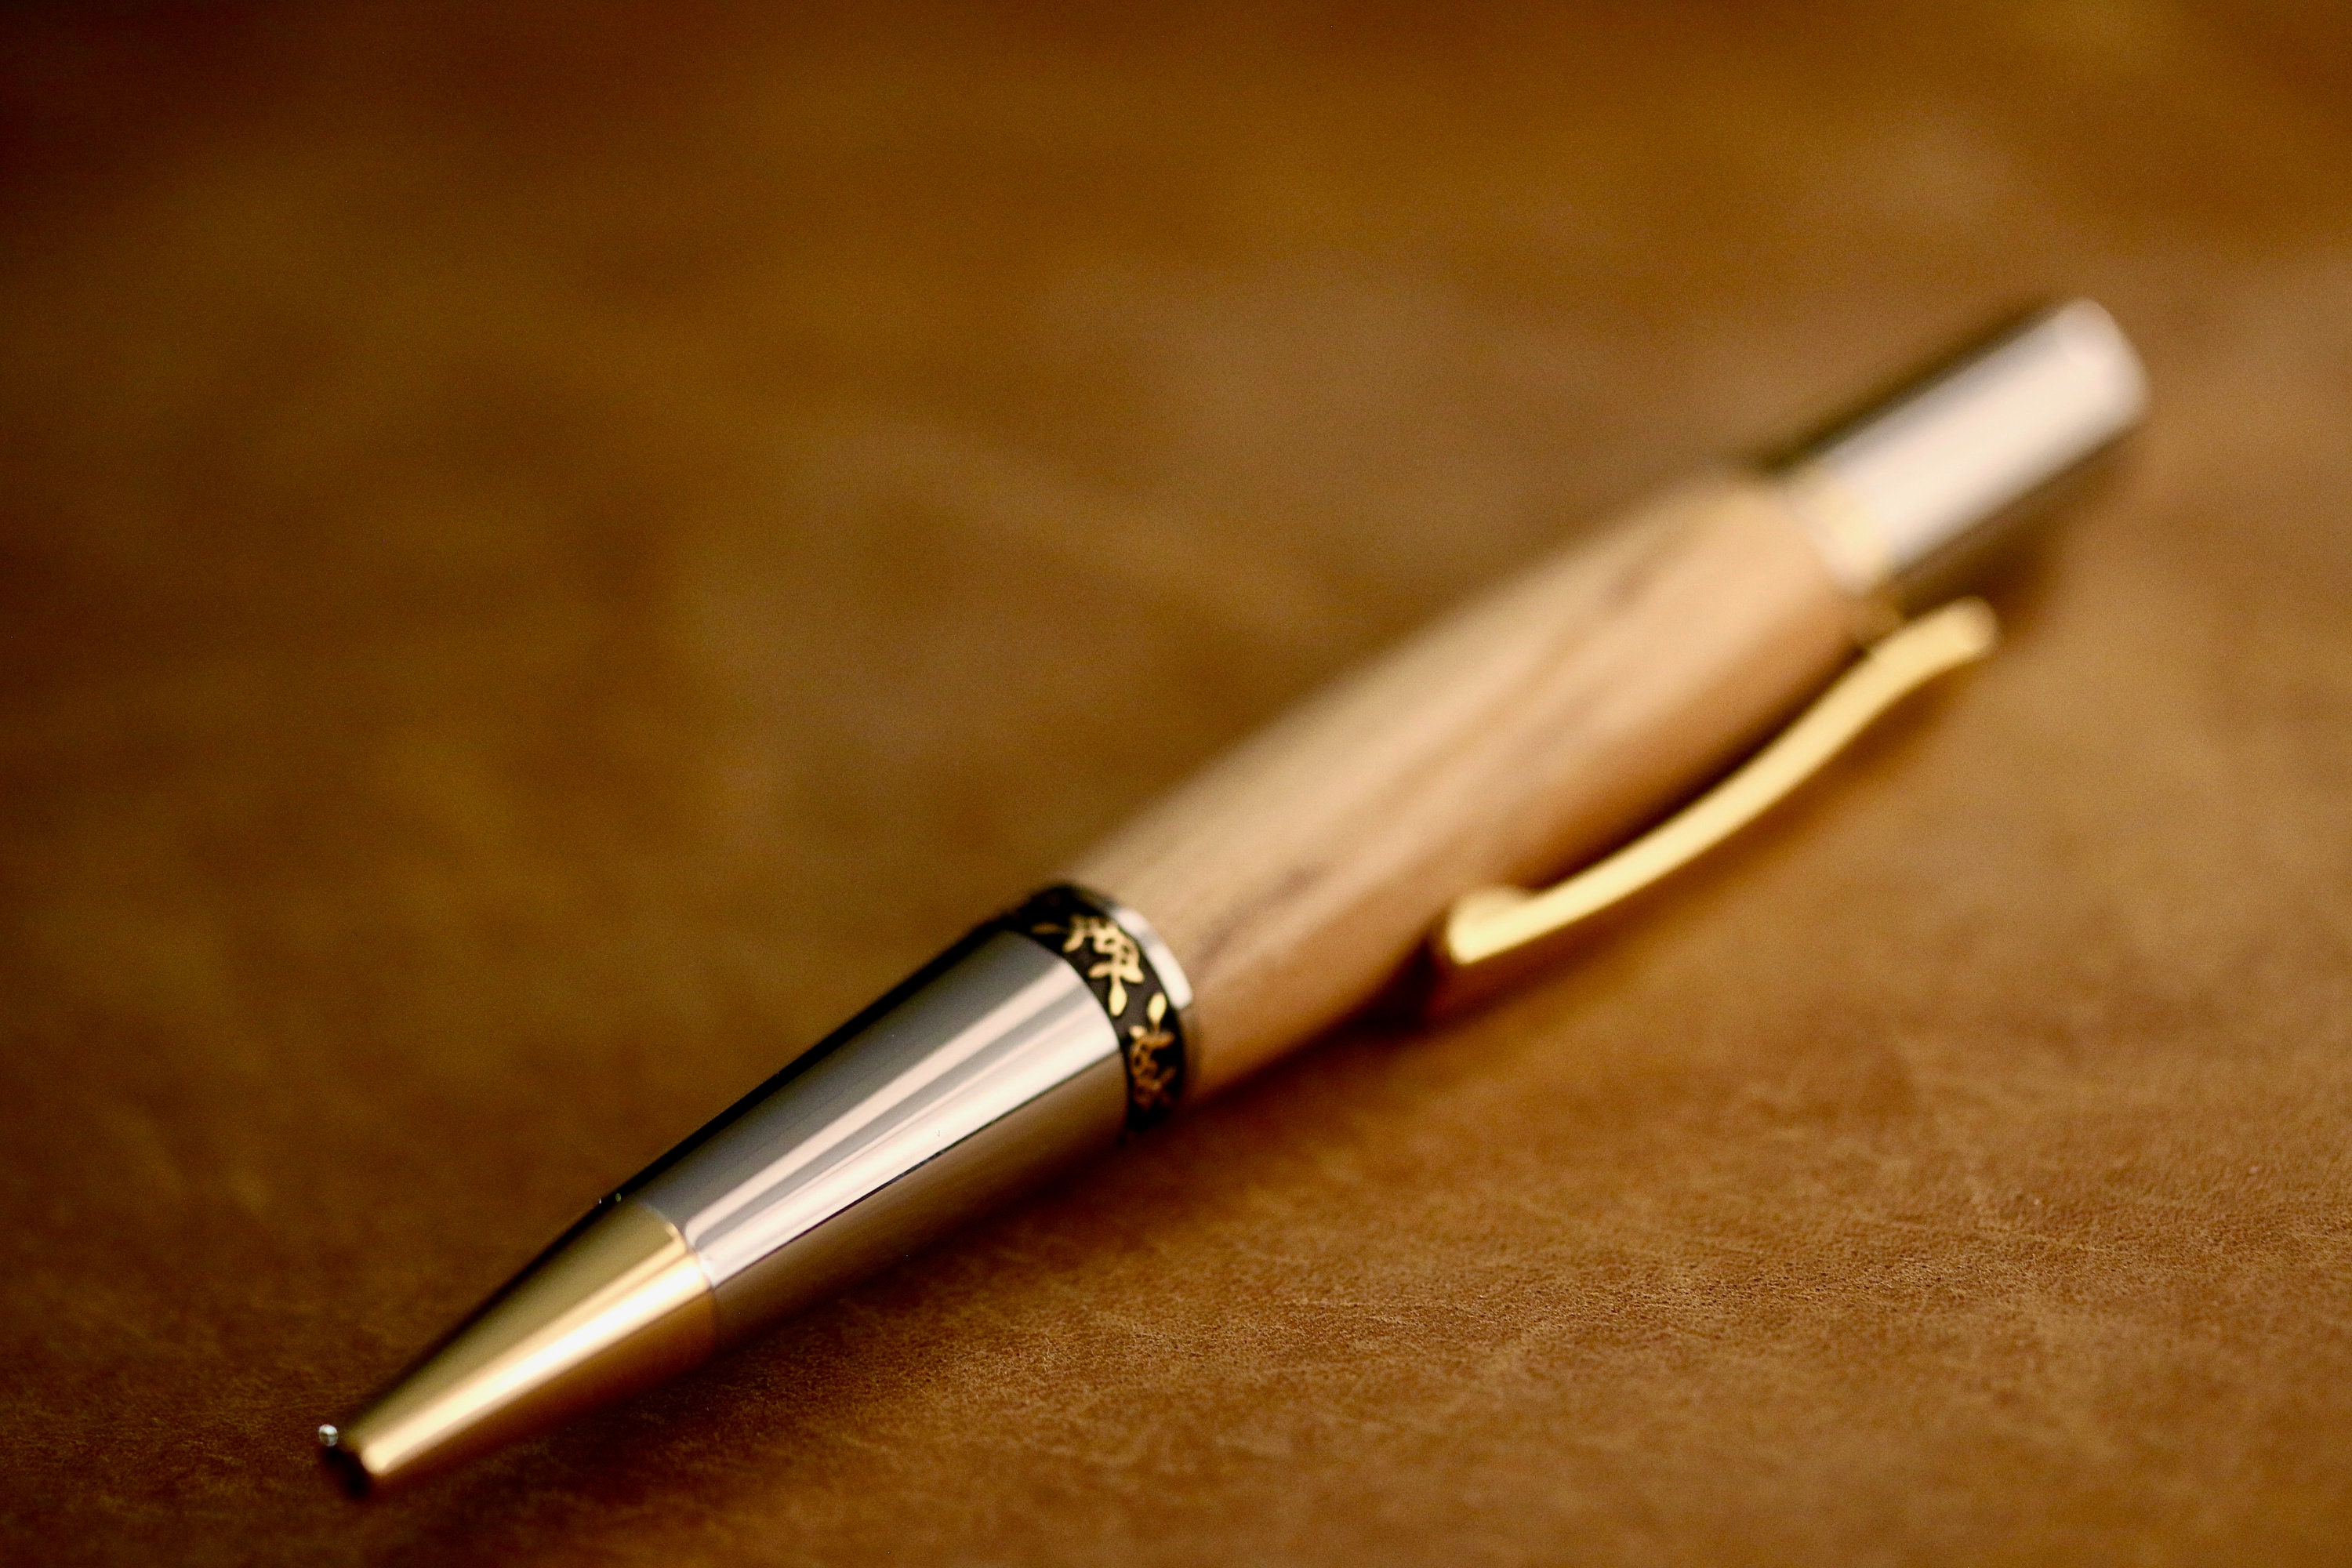  Nine-Year Anniversary Willow Wood Pen : Handmade Products